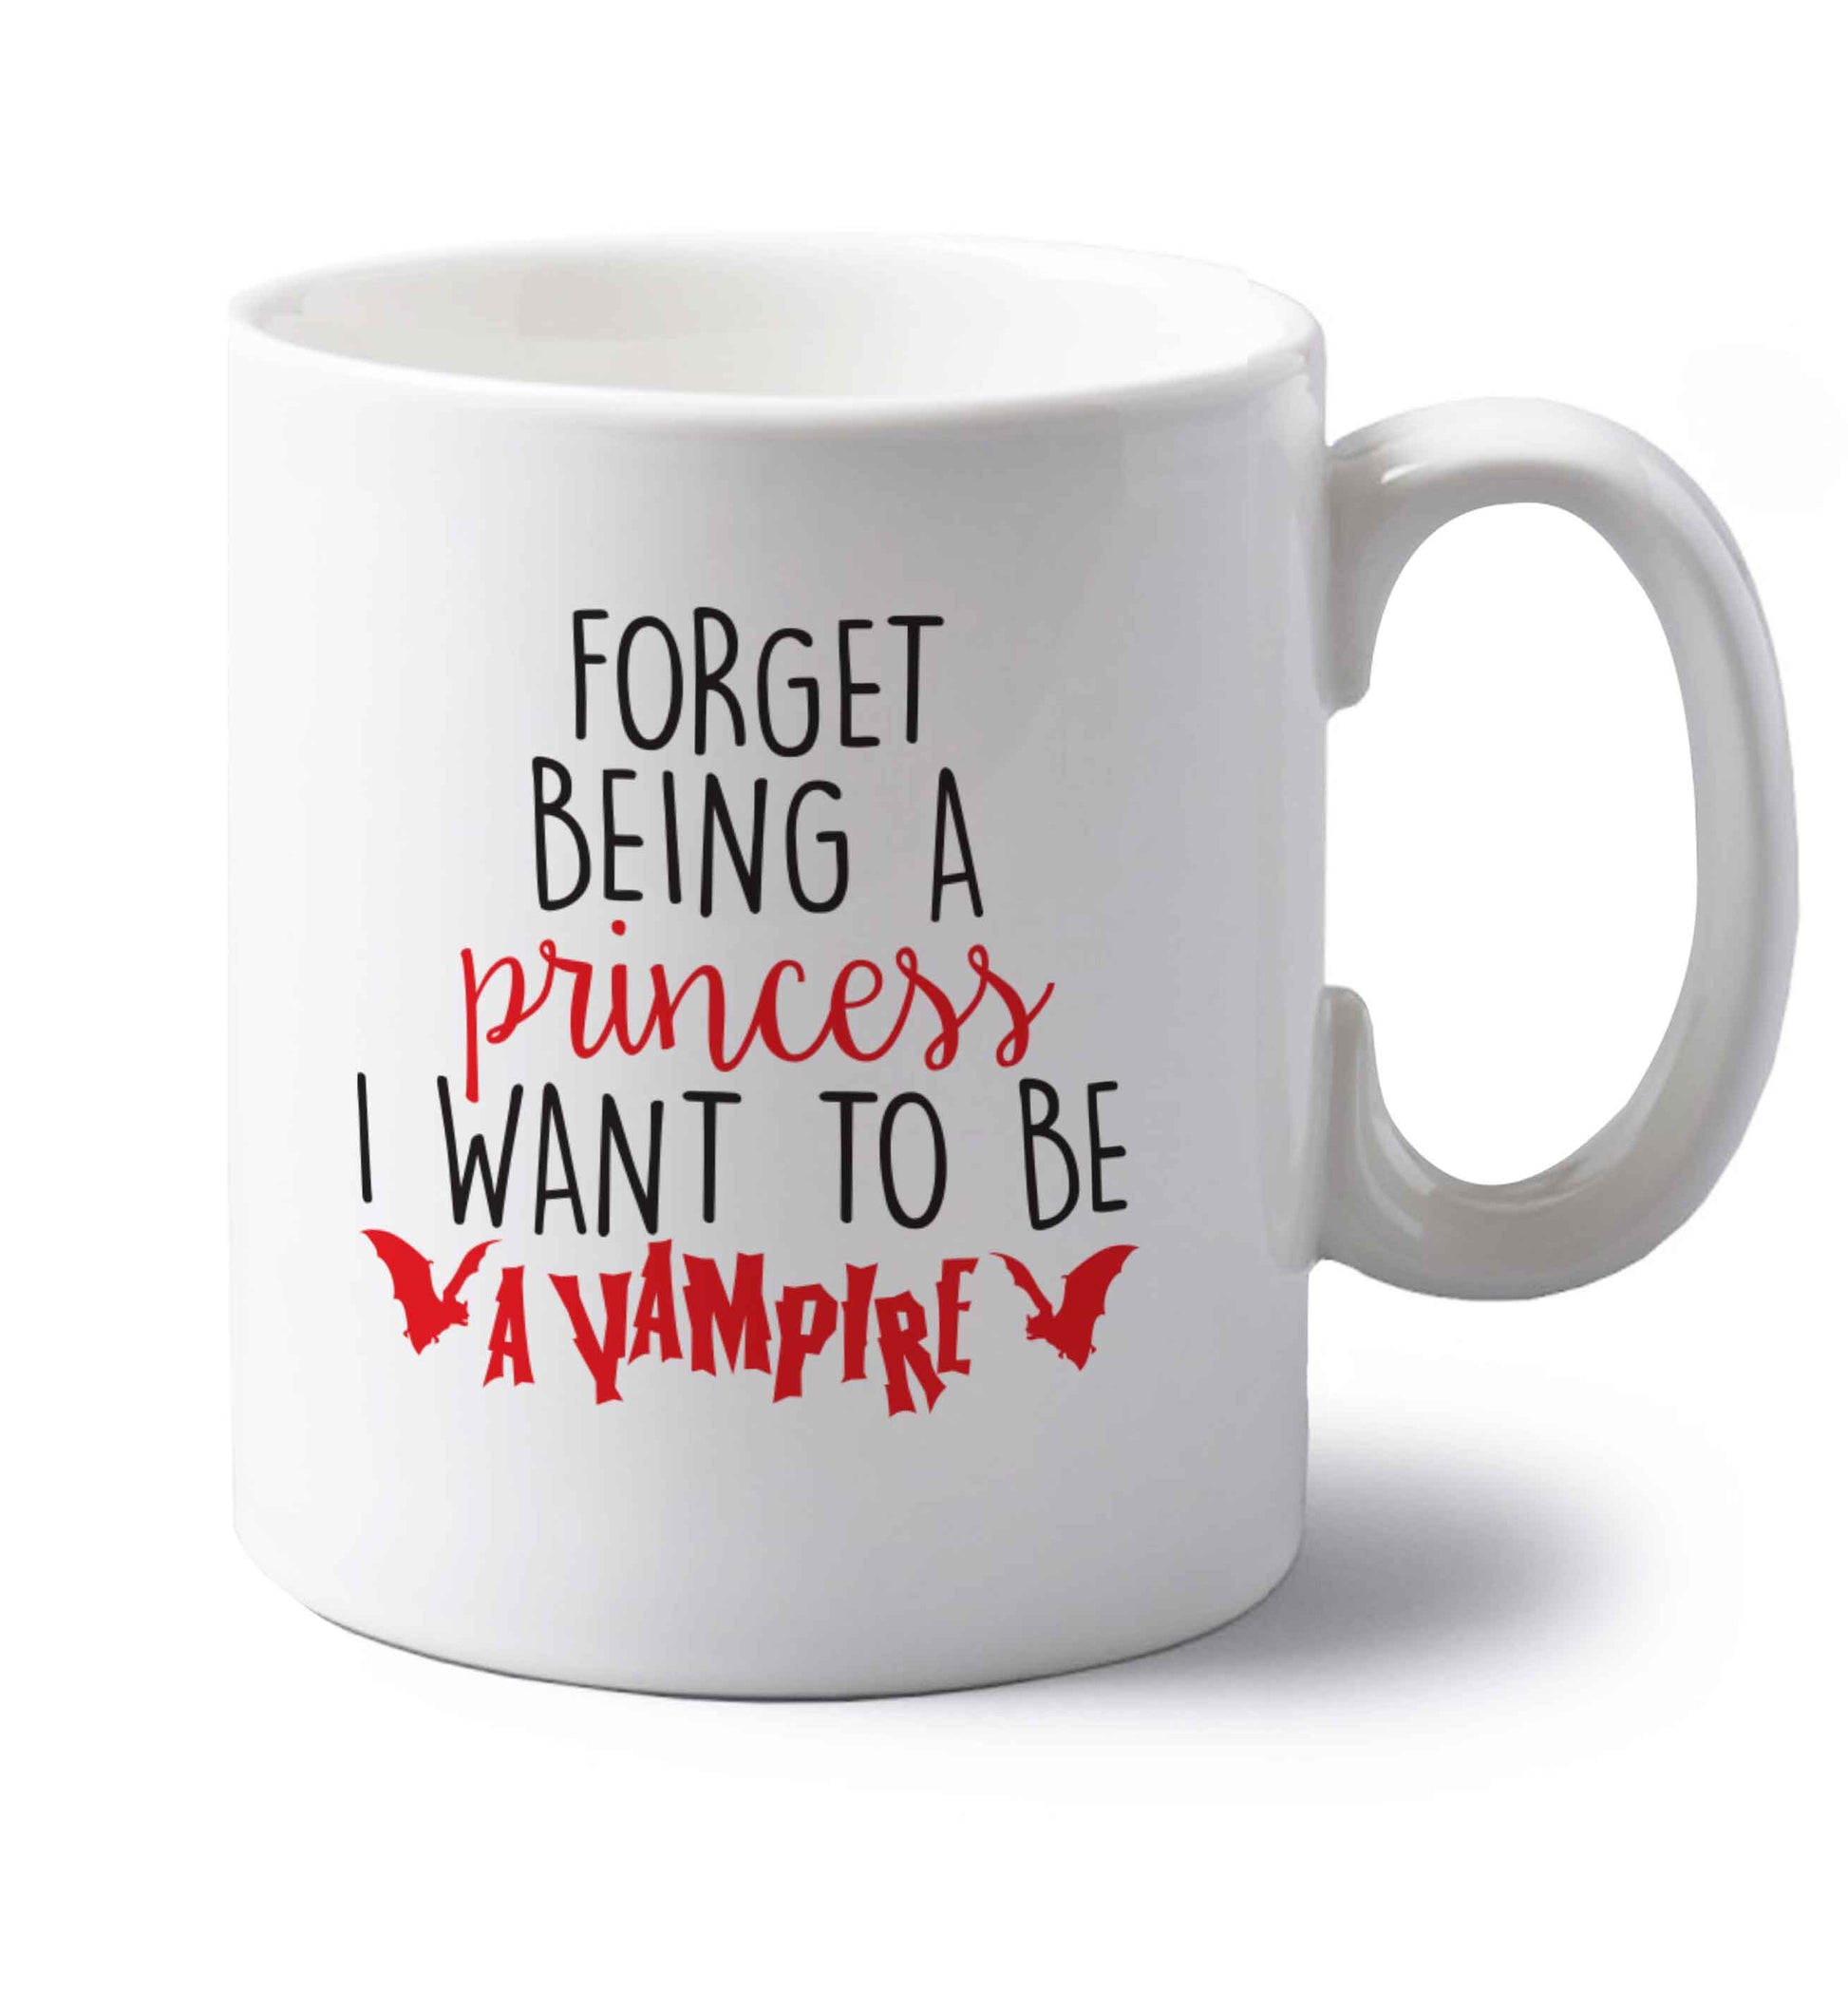 Forget being a princess I want to be a vampire left handed white ceramic mug 